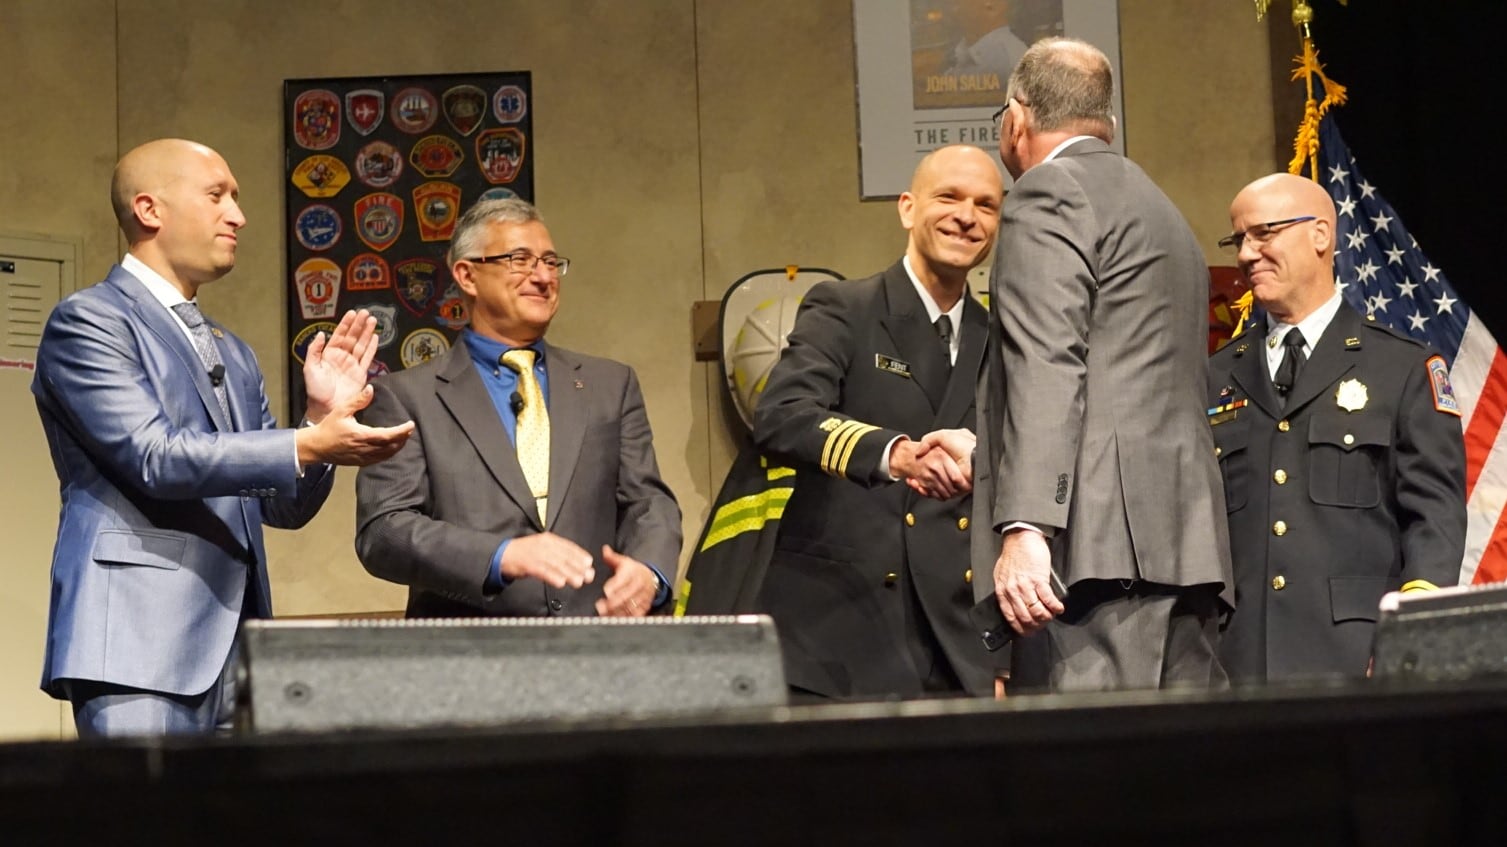 Kenny Fent (NIOSH) shakes hands with David Rhodes (Fire & Rescue) on stage at FDIC after signing up for the NFR. Andrew Pantelis (IAFF), Victor Stagnaro (NFFF), and Joe Schumacher (FCSN) also shared their support for the NFR.